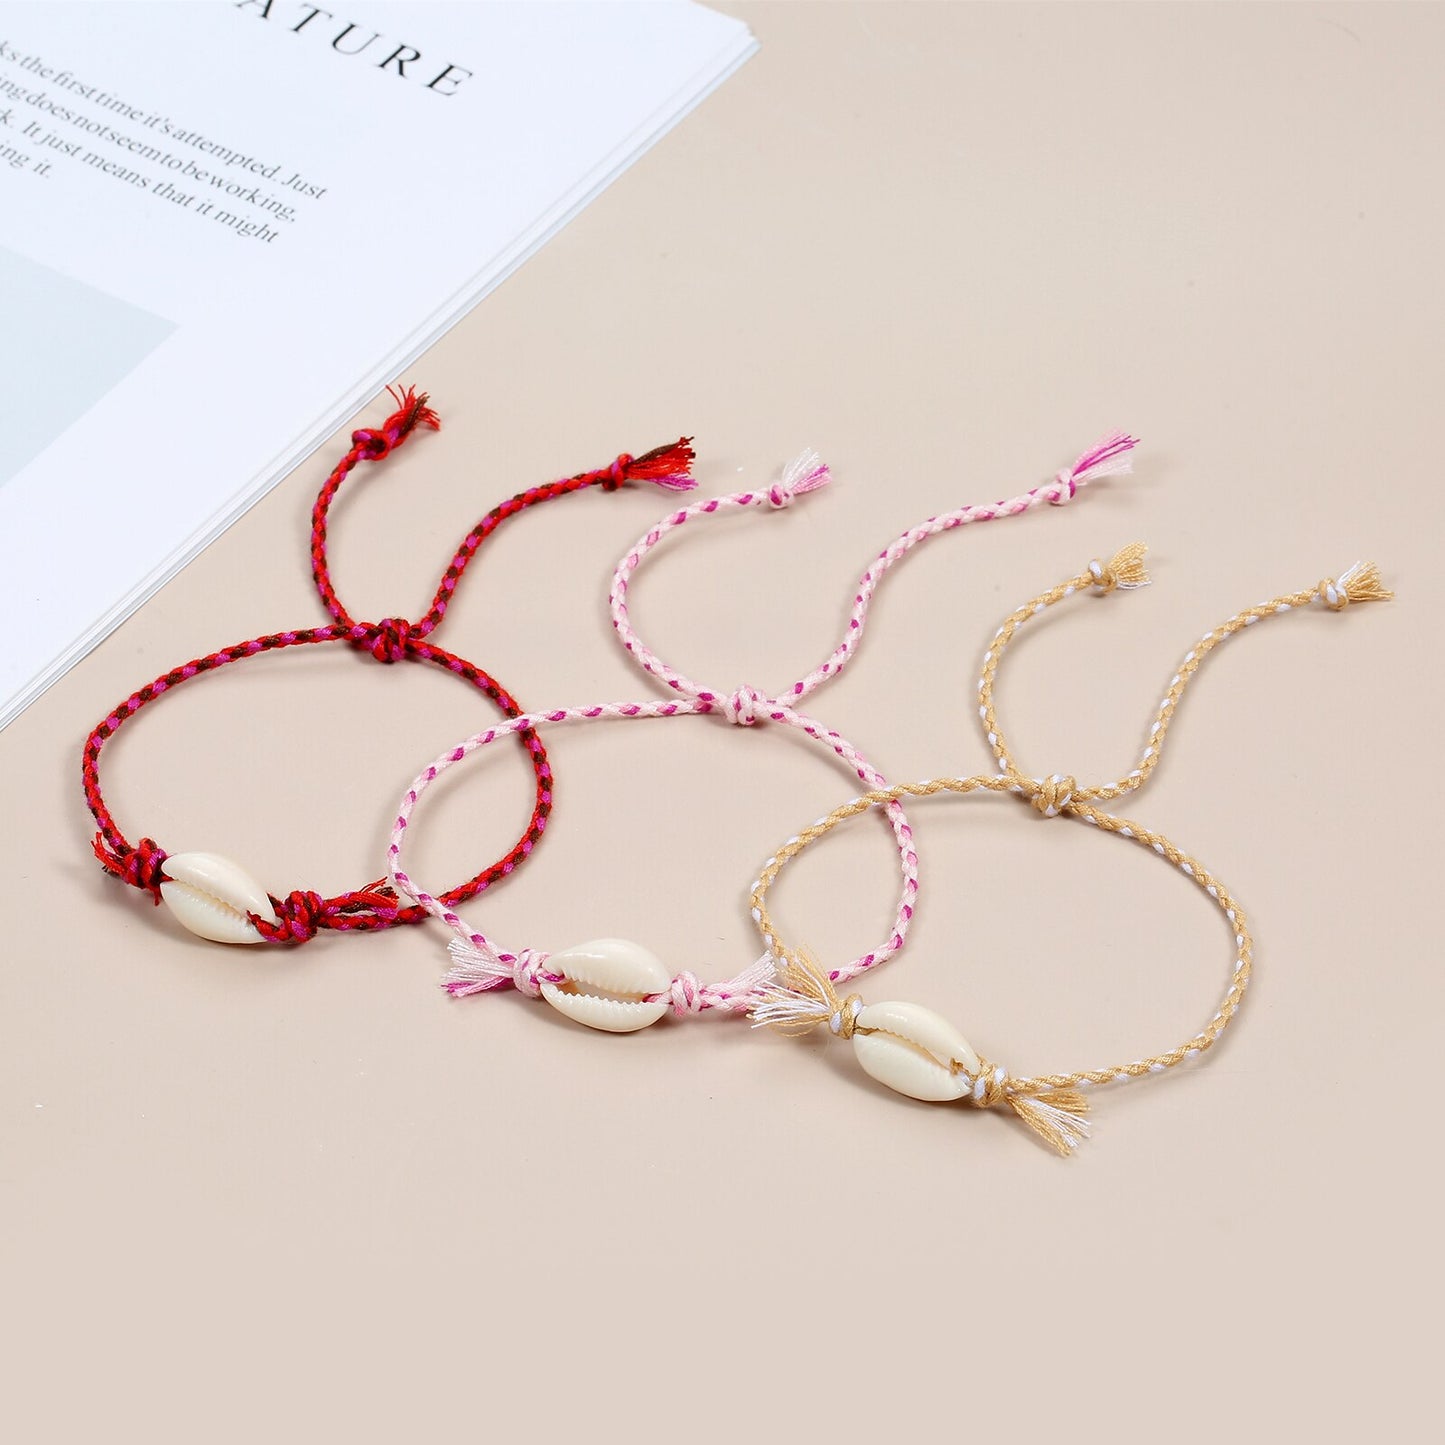 12Pcs Beach Shell Bracelets Anklets Set for Women Girls Summer Handmade Braided Thick Rope Tassel Chain Jewelry Wholesale